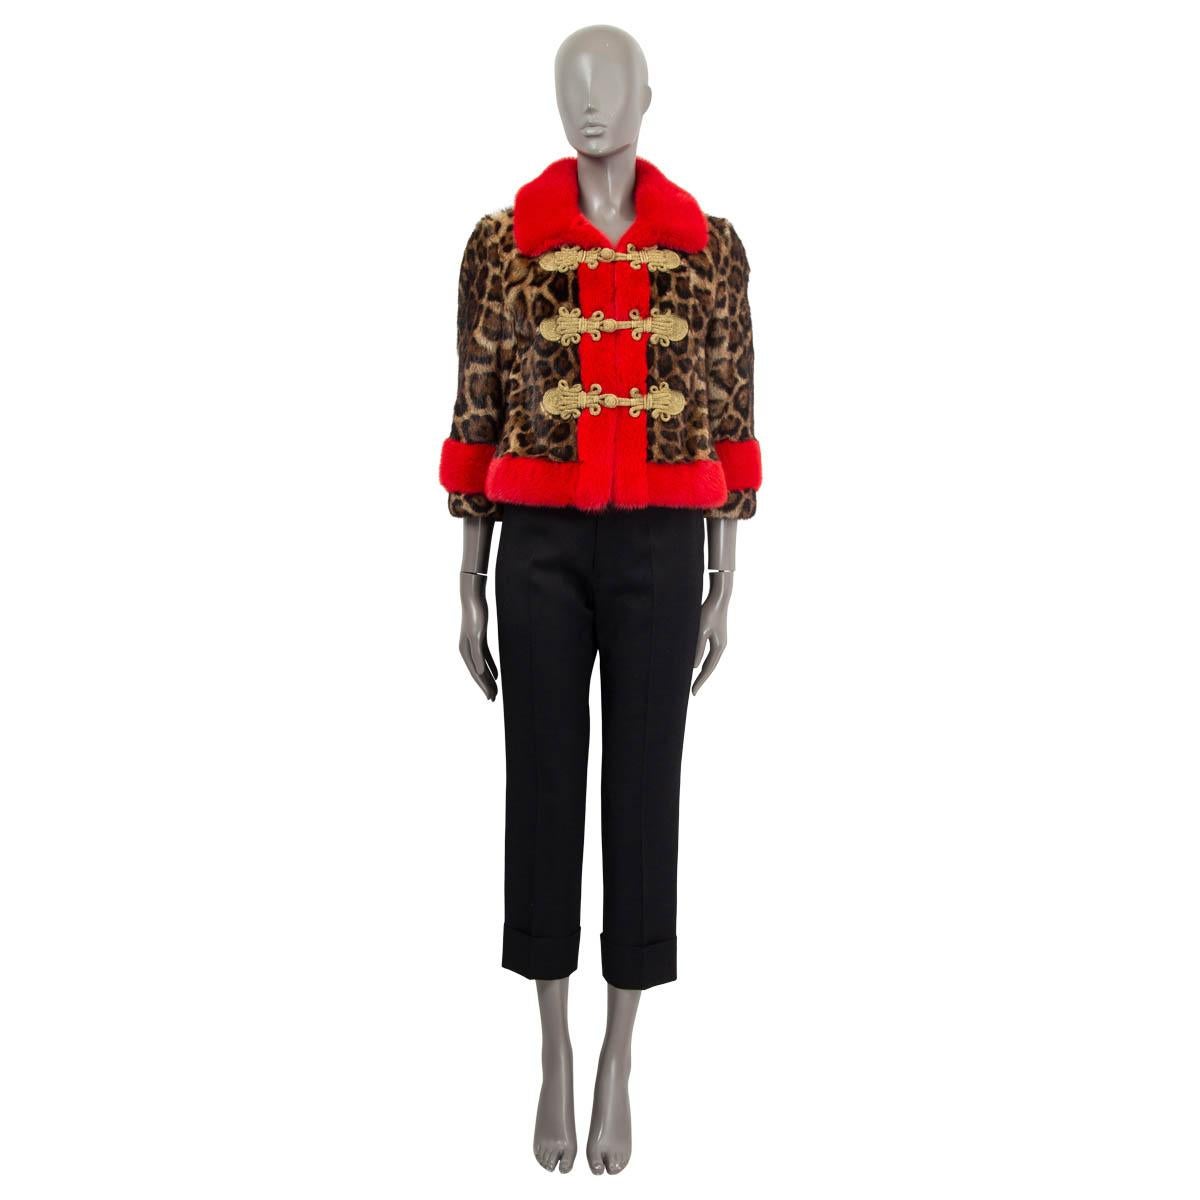 100% authentic Gucci Resort 2017 hussar military jacket in red, brown and camel bobak marmot and mink fur (100%). Open with gold braided buttons on the front. Lined in purple silk (100%) and has two embroidered double headed gazelles on the inside.